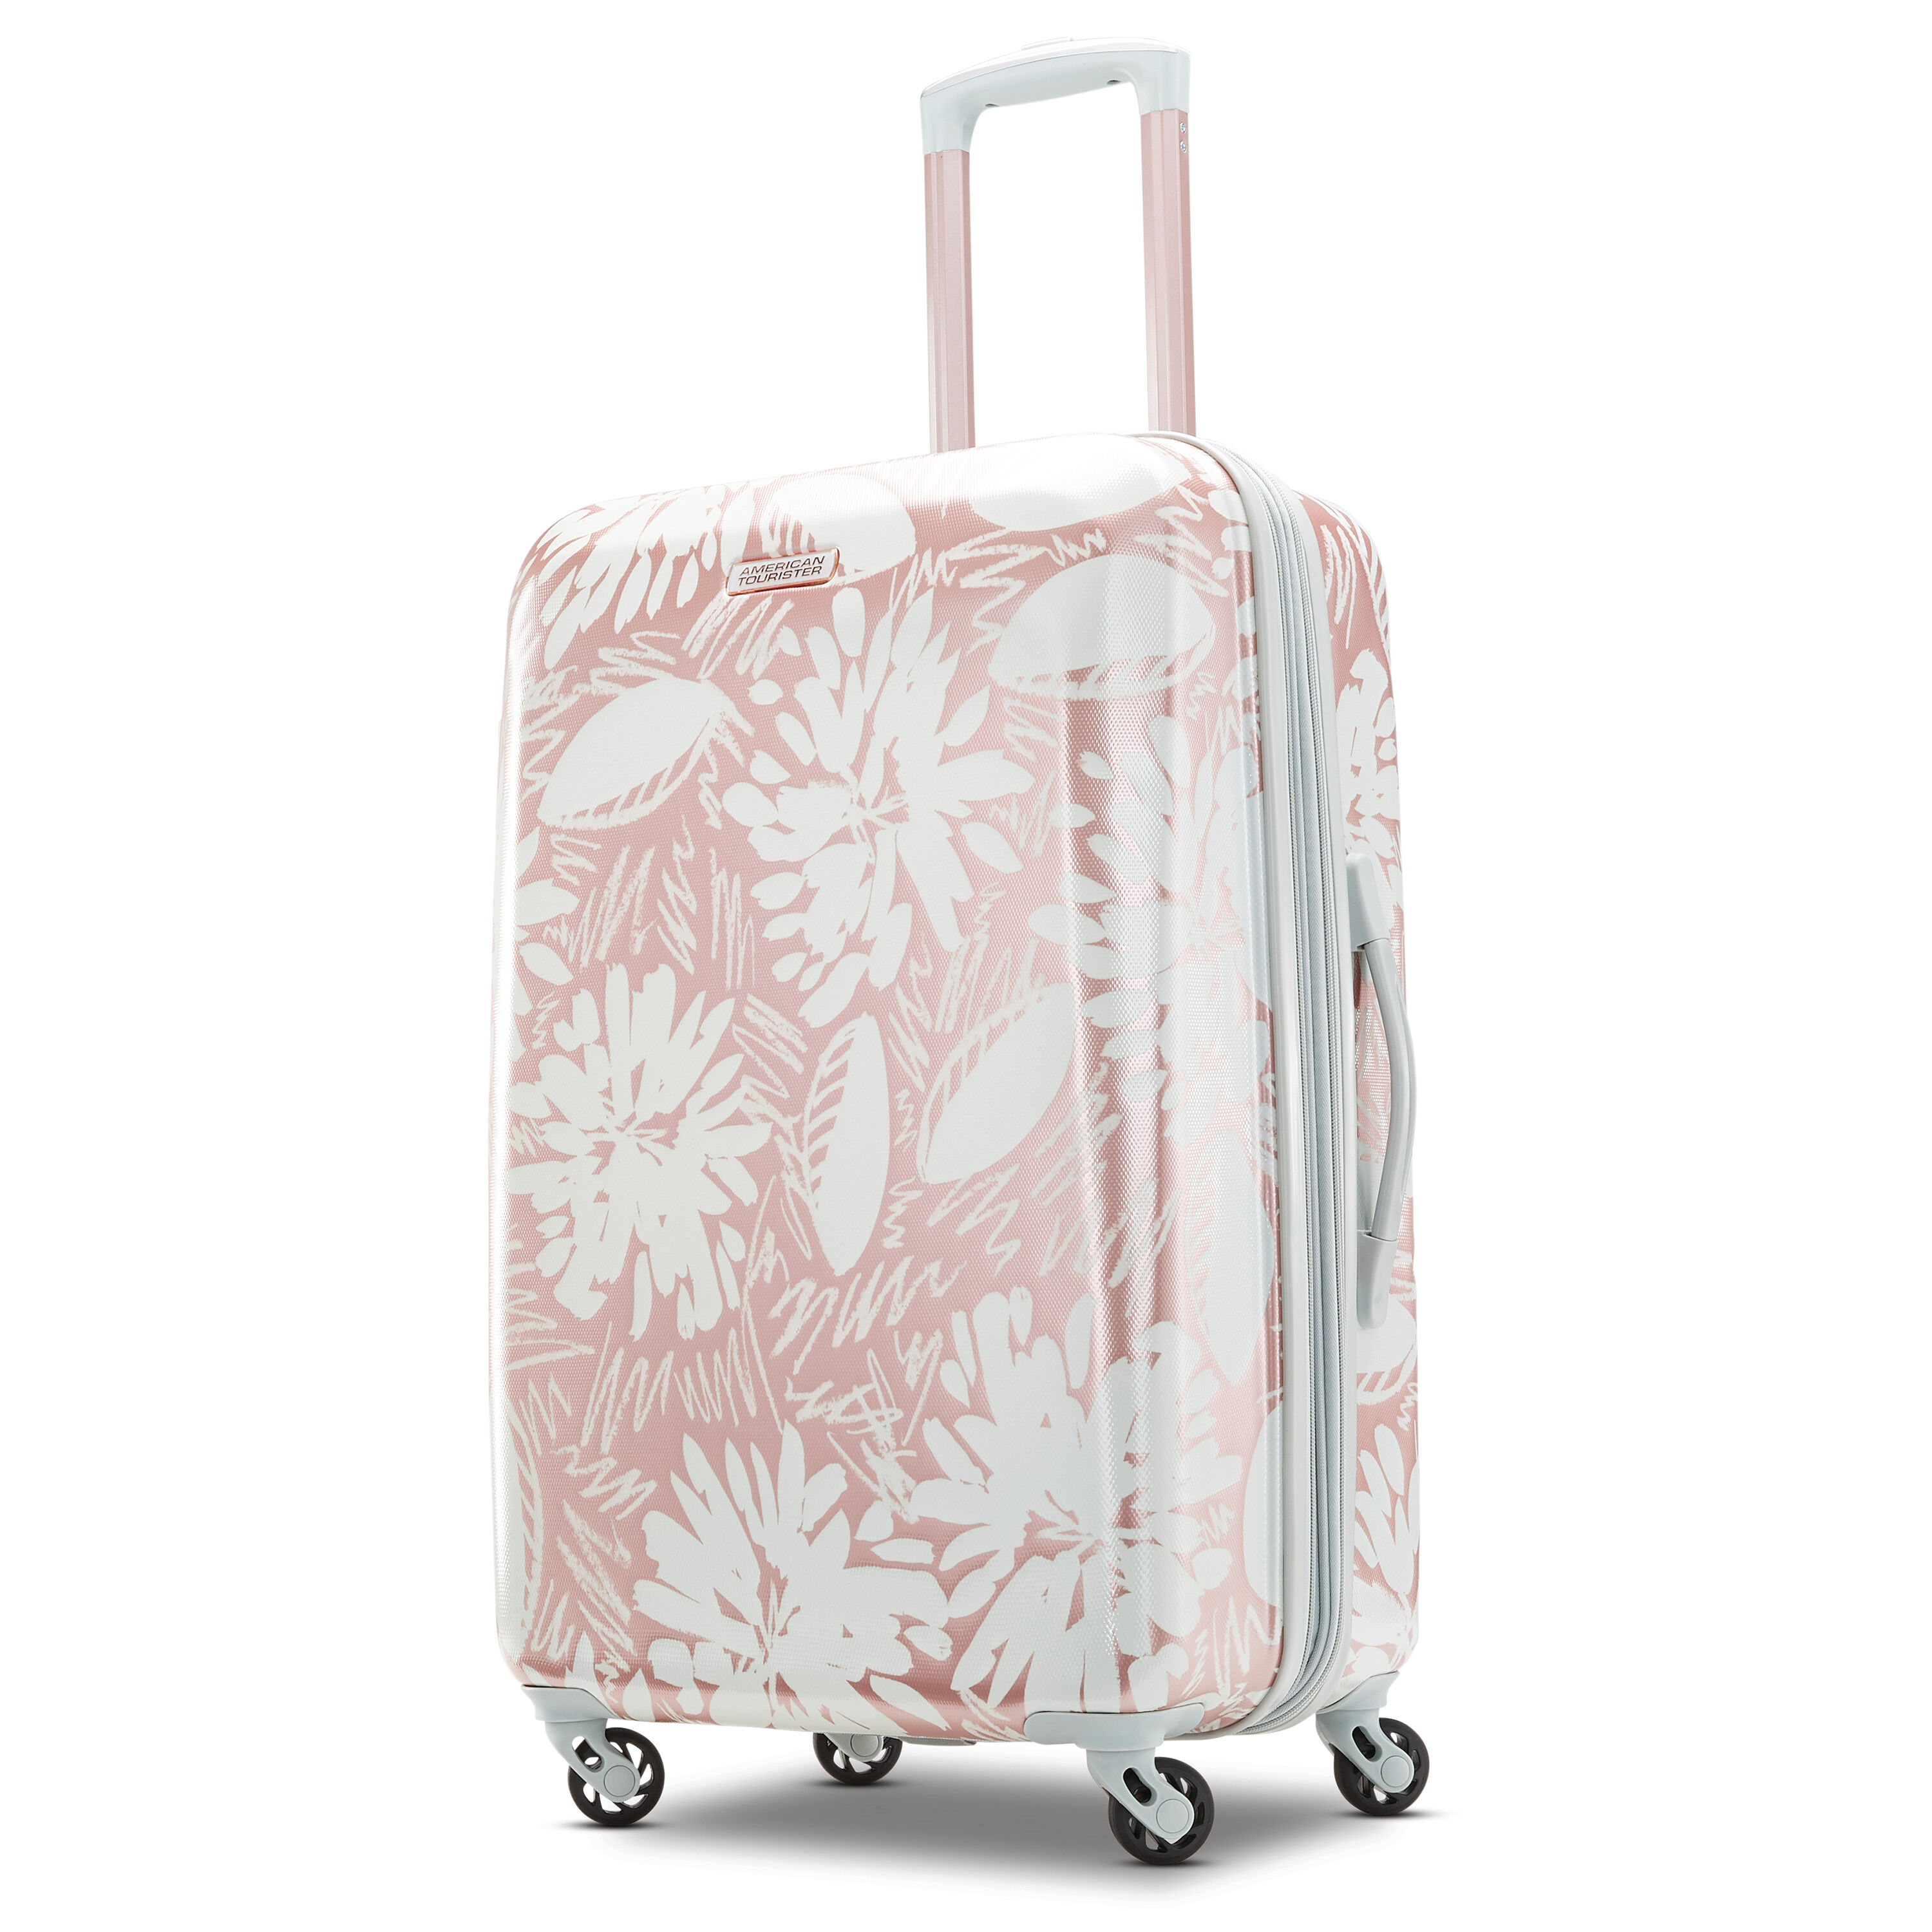 This American Tourister Carry-on Is Up to 40% Off